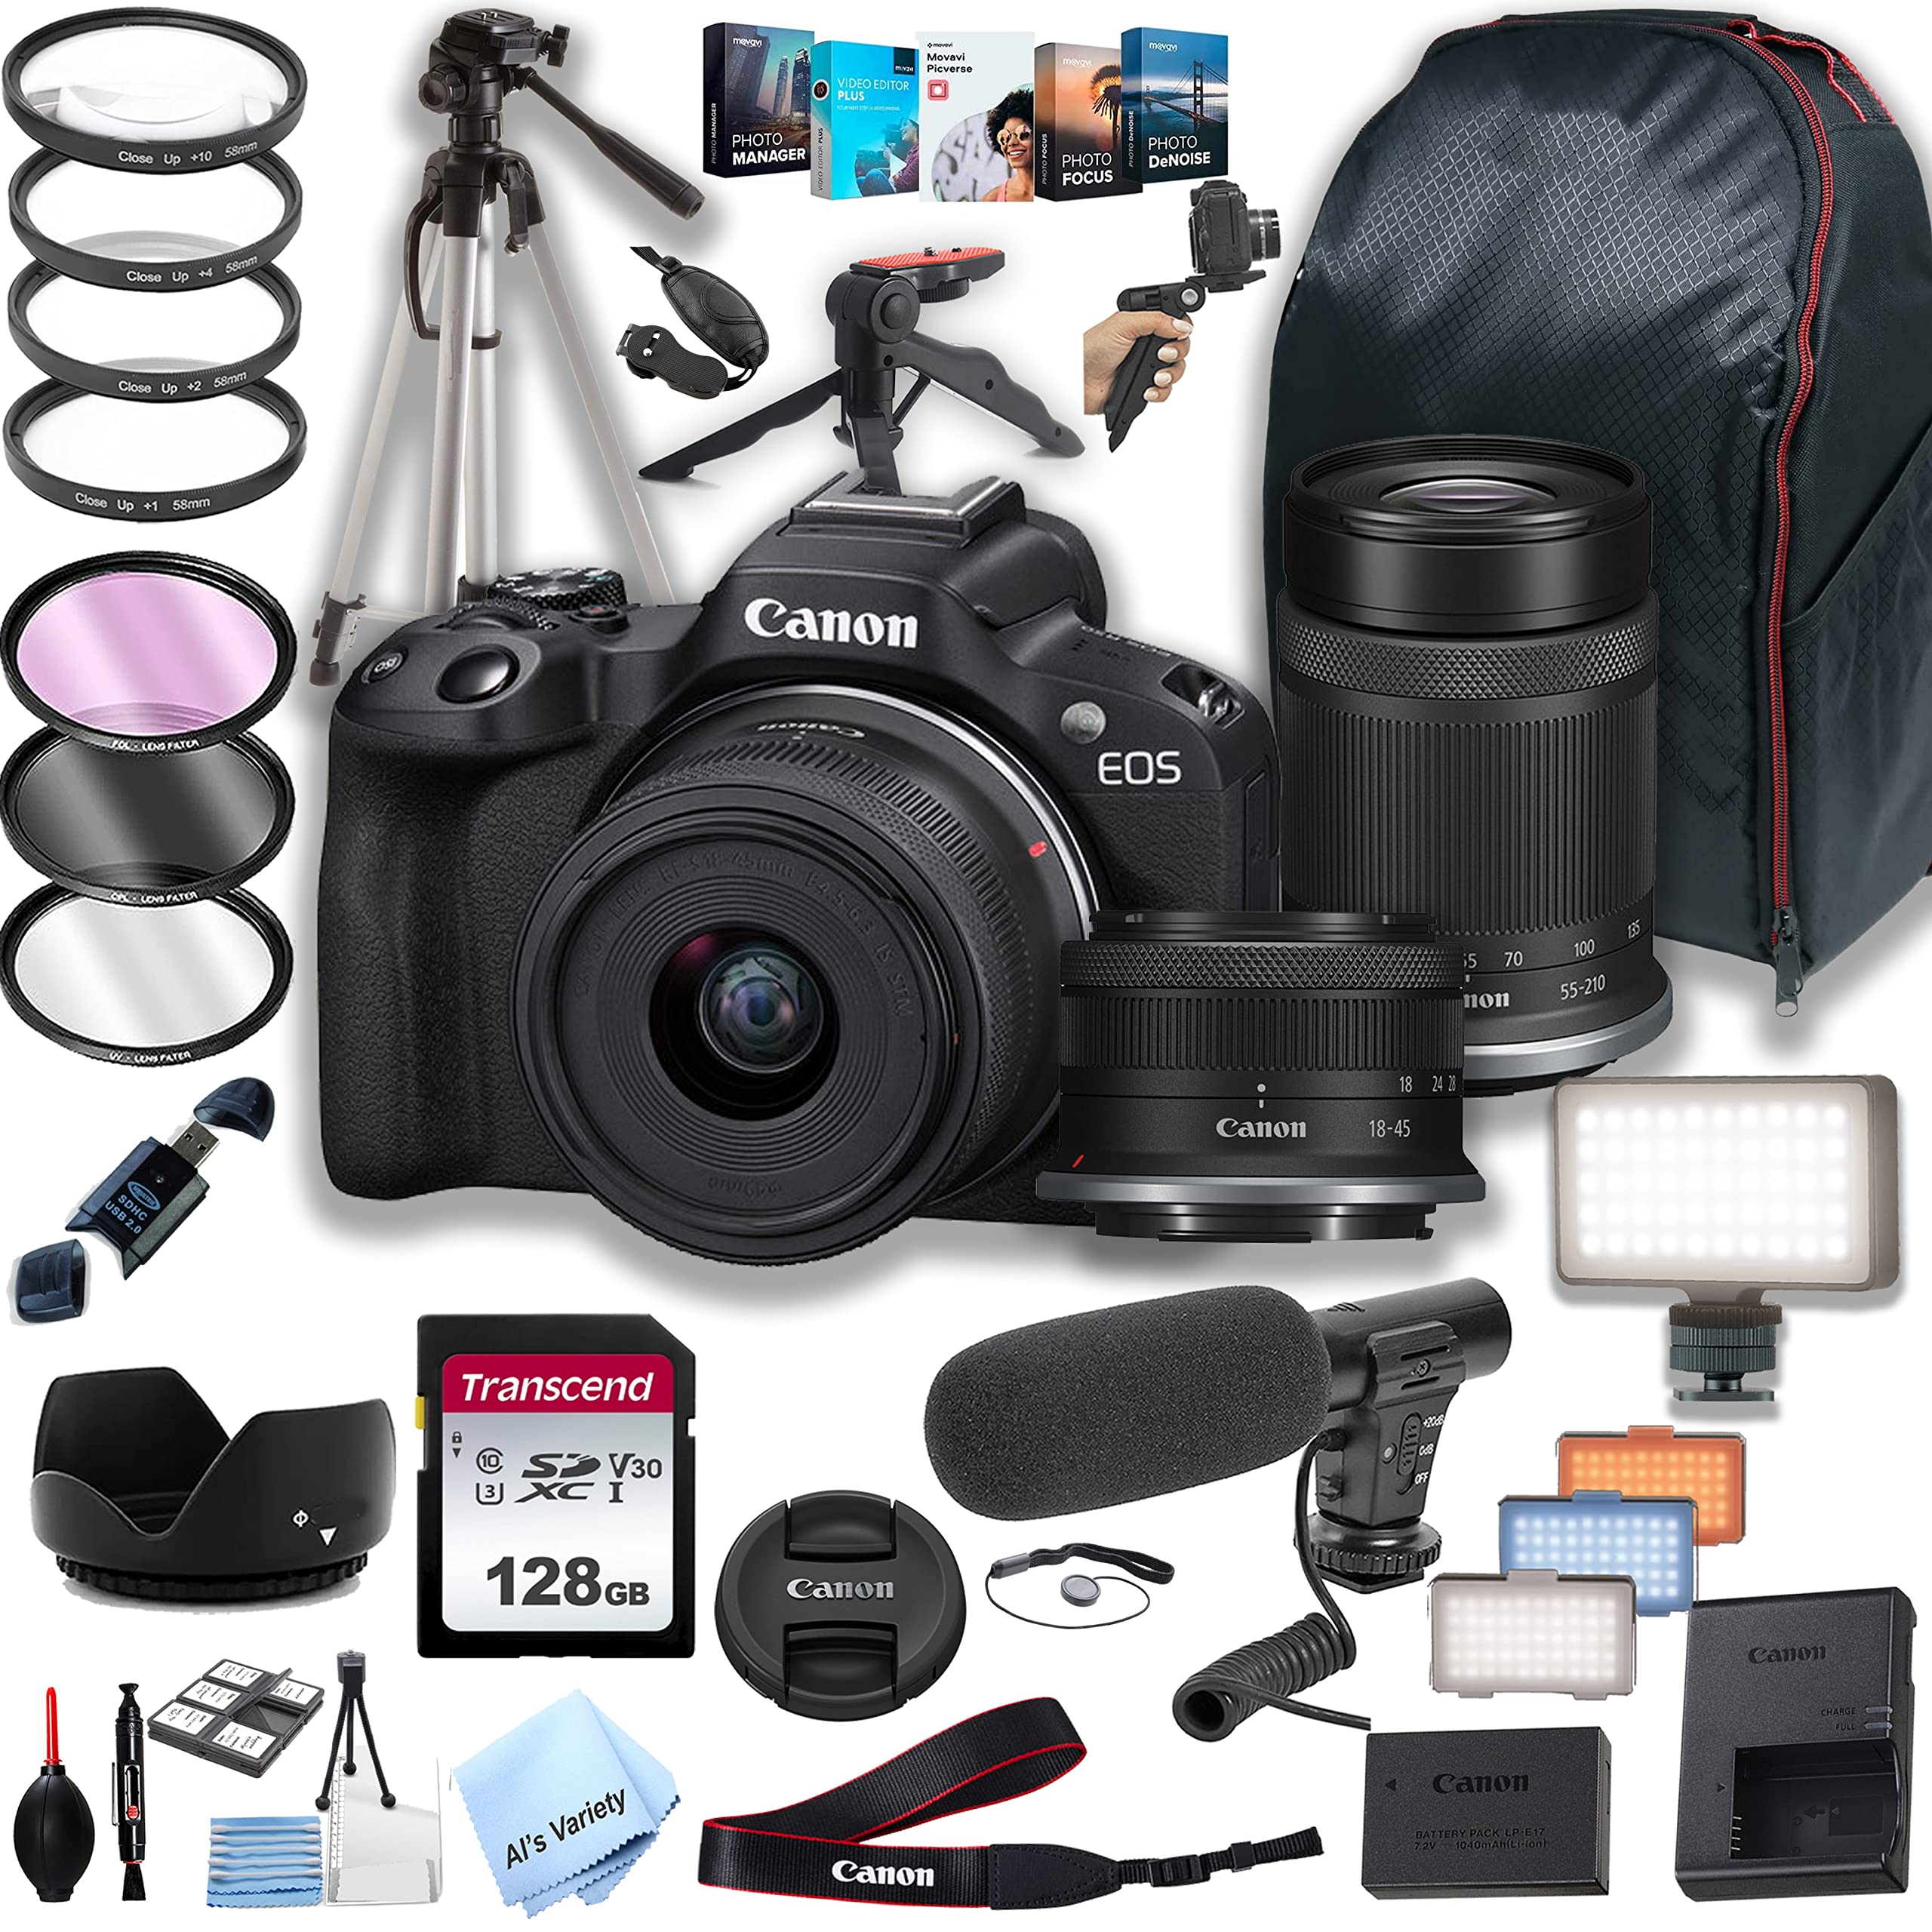 Canon EOS R50 Mirrorless Camera with 18-45mm and 55-210mm Lenses + 128GB Memory + LED Video Light + Microphone + Back Pack + Steady Grip Pod + Tripod + Filters + Software + More